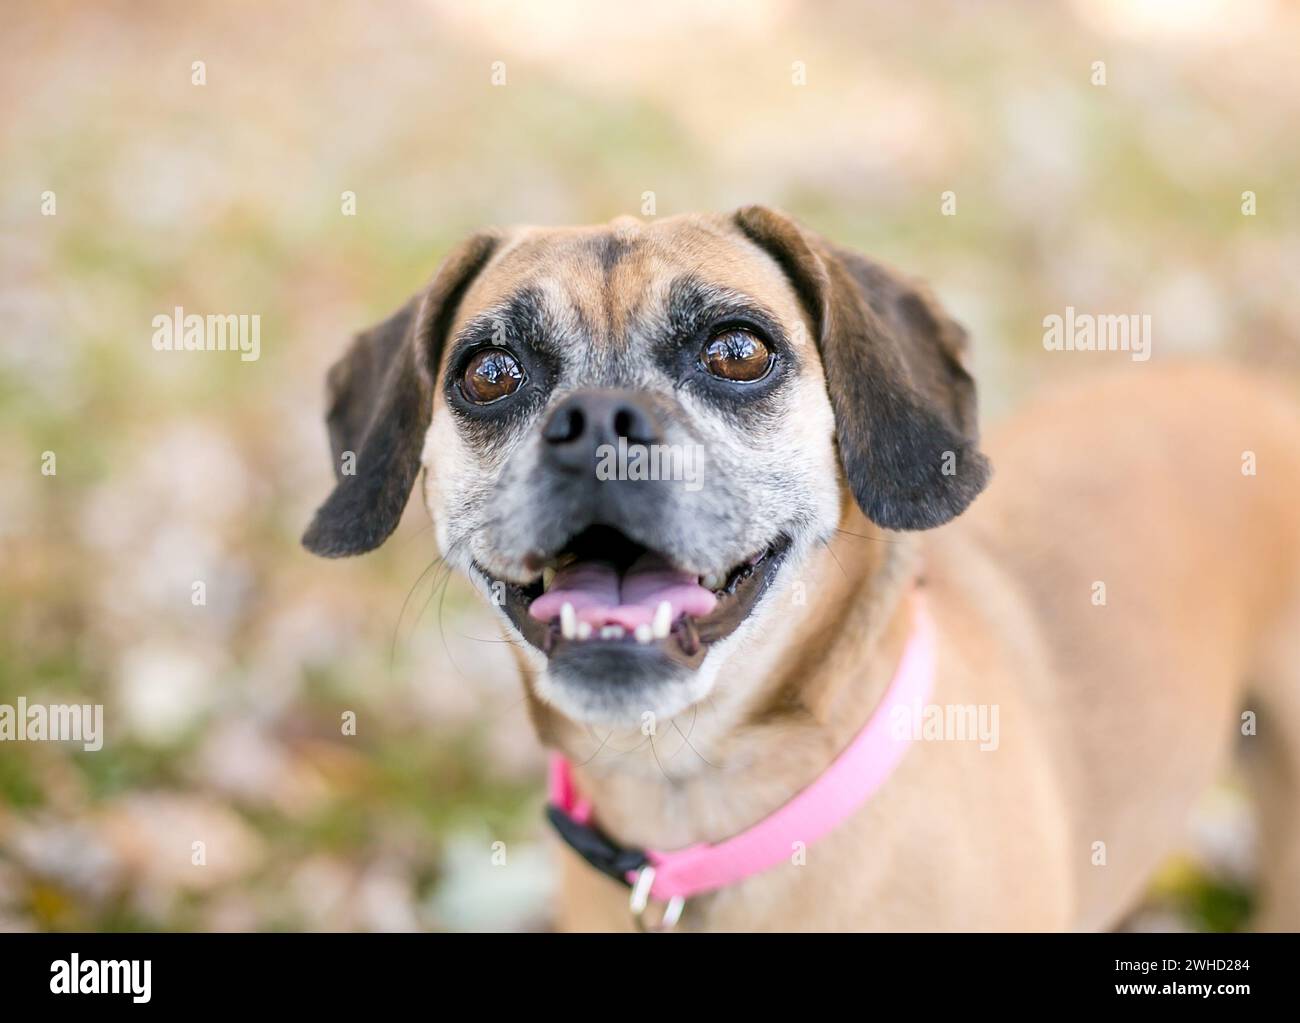 A Pug x Beagle mixed breed dog, also known as a 'Puggle', wearing a pink collar Stock Photo